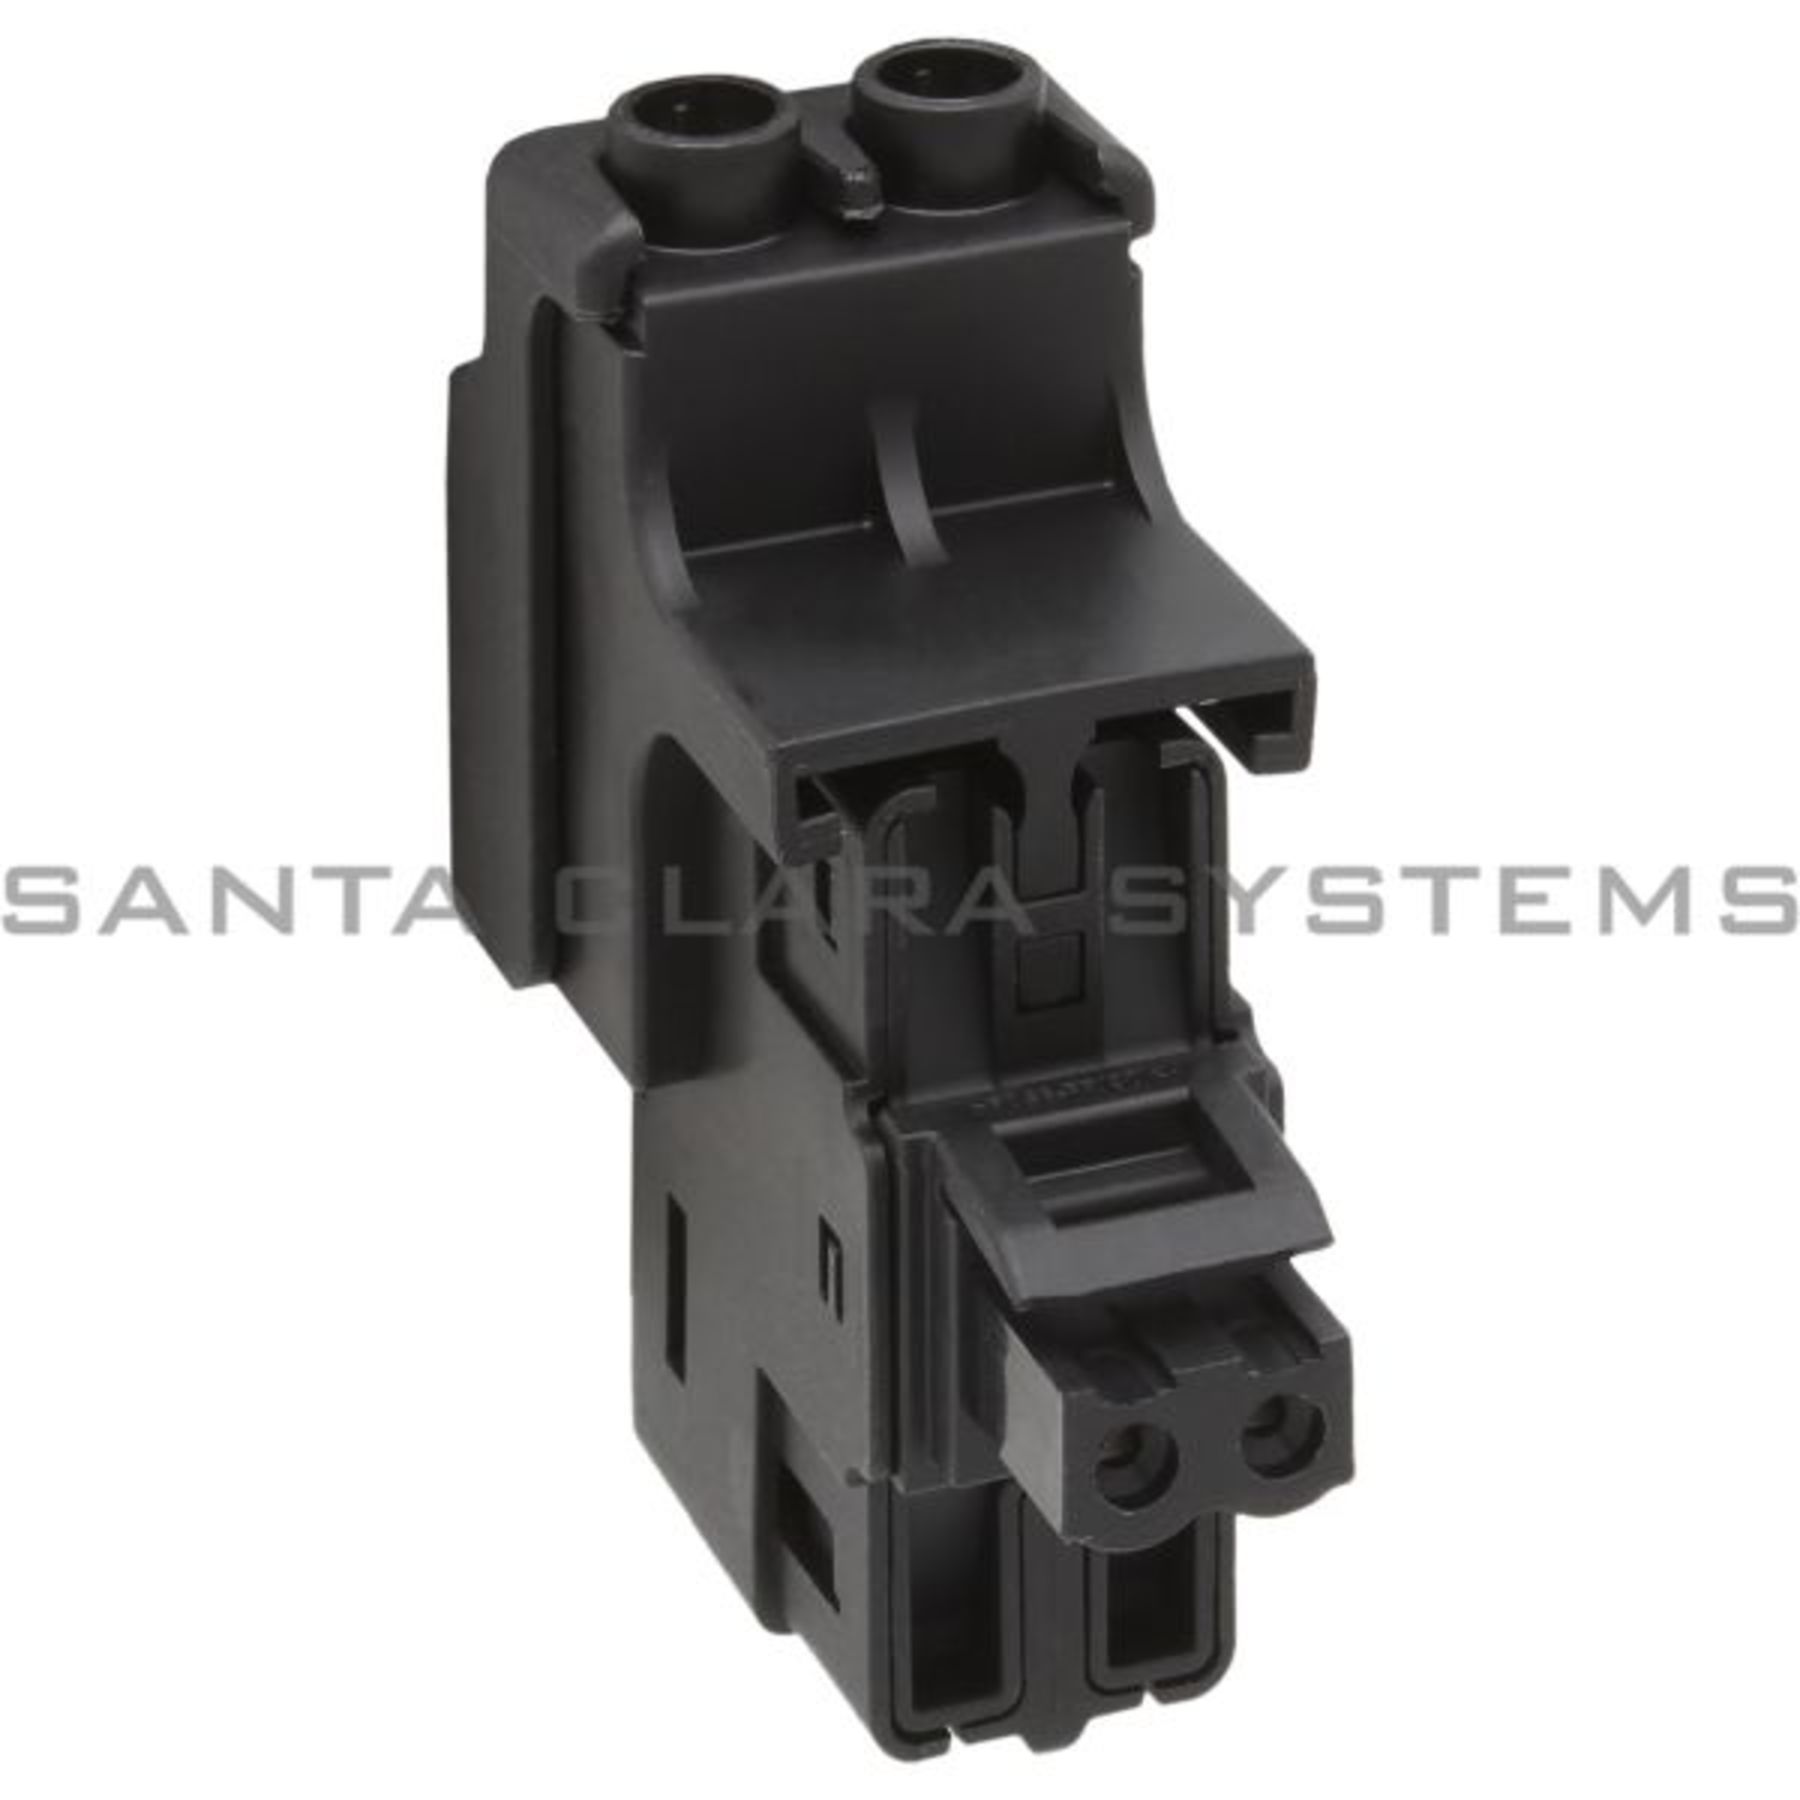 Rockwell Automation 2198-KITCON-PWR40 Replacement Connector Kit